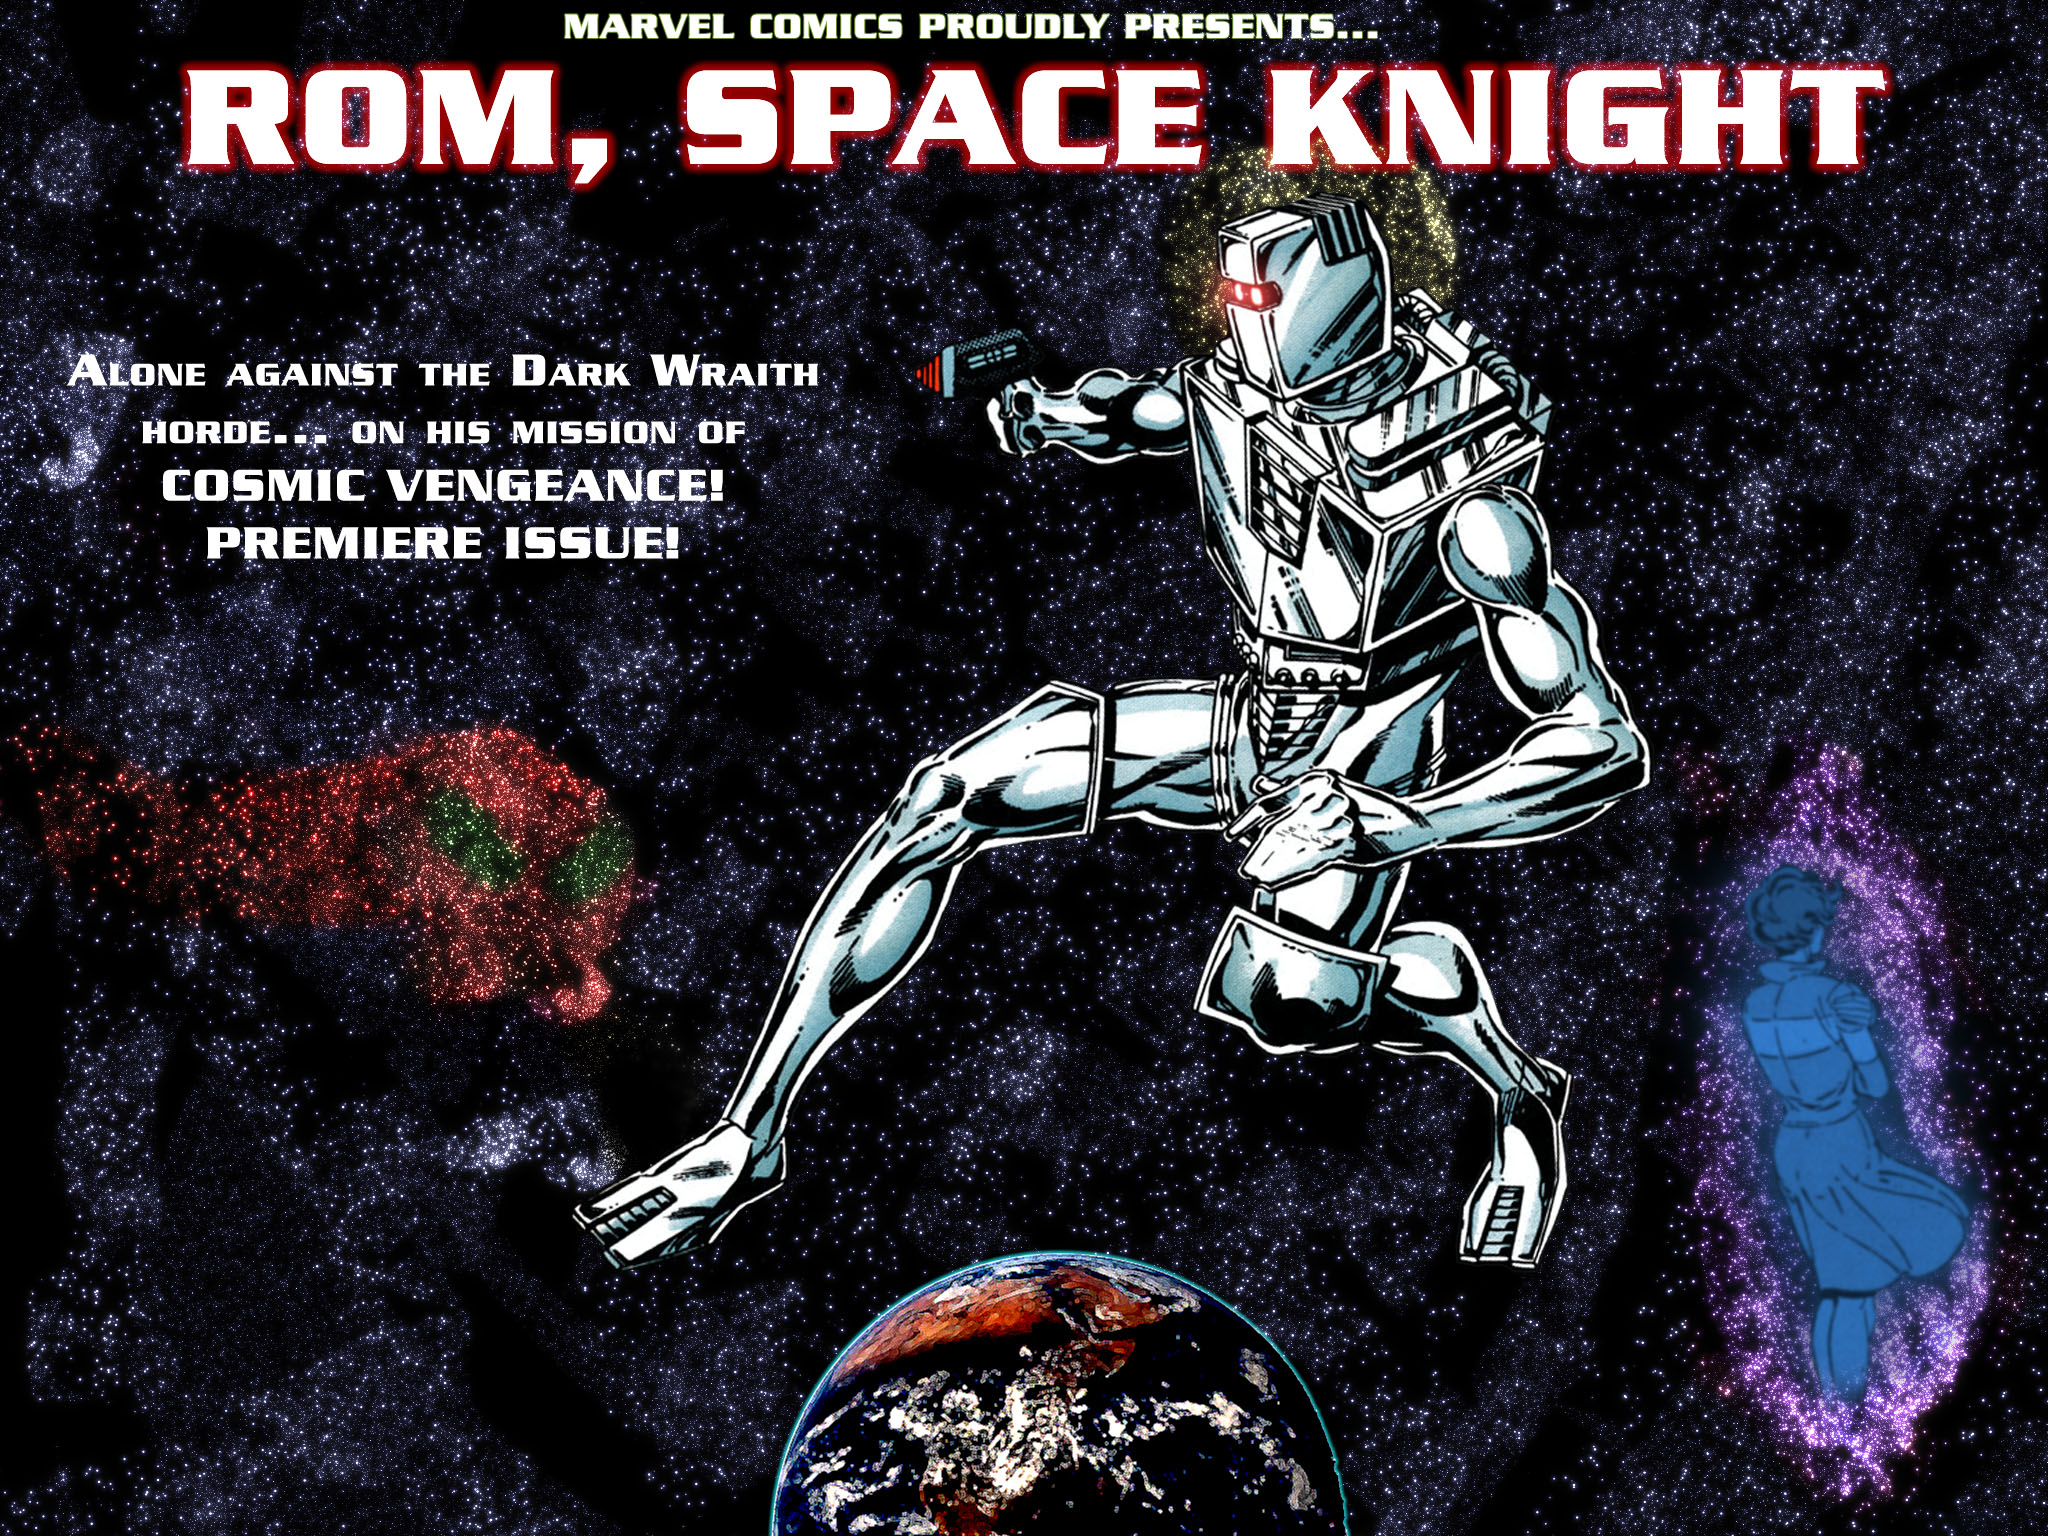 Rom: Space Knight #4